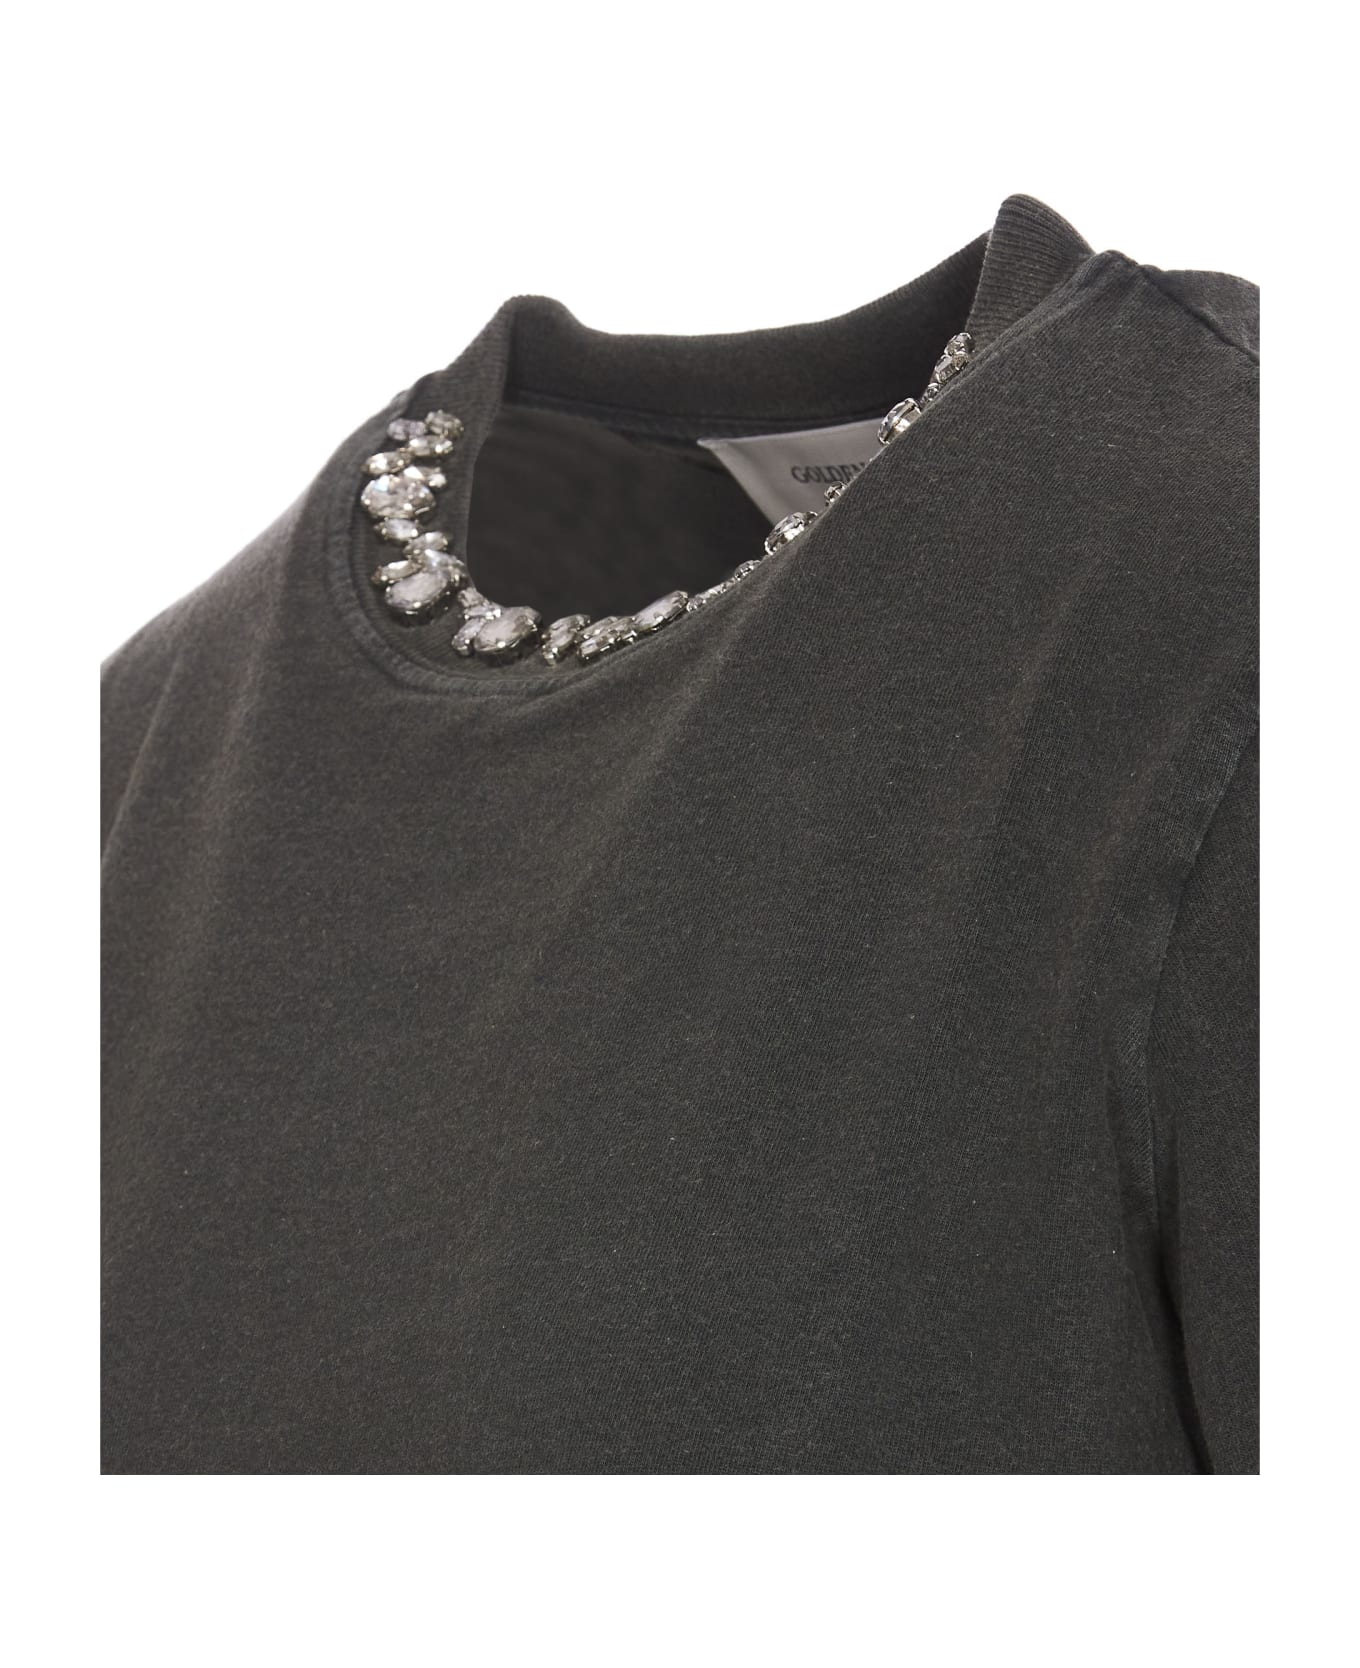 Golden Goose T-shirtwith Crystals - Grey